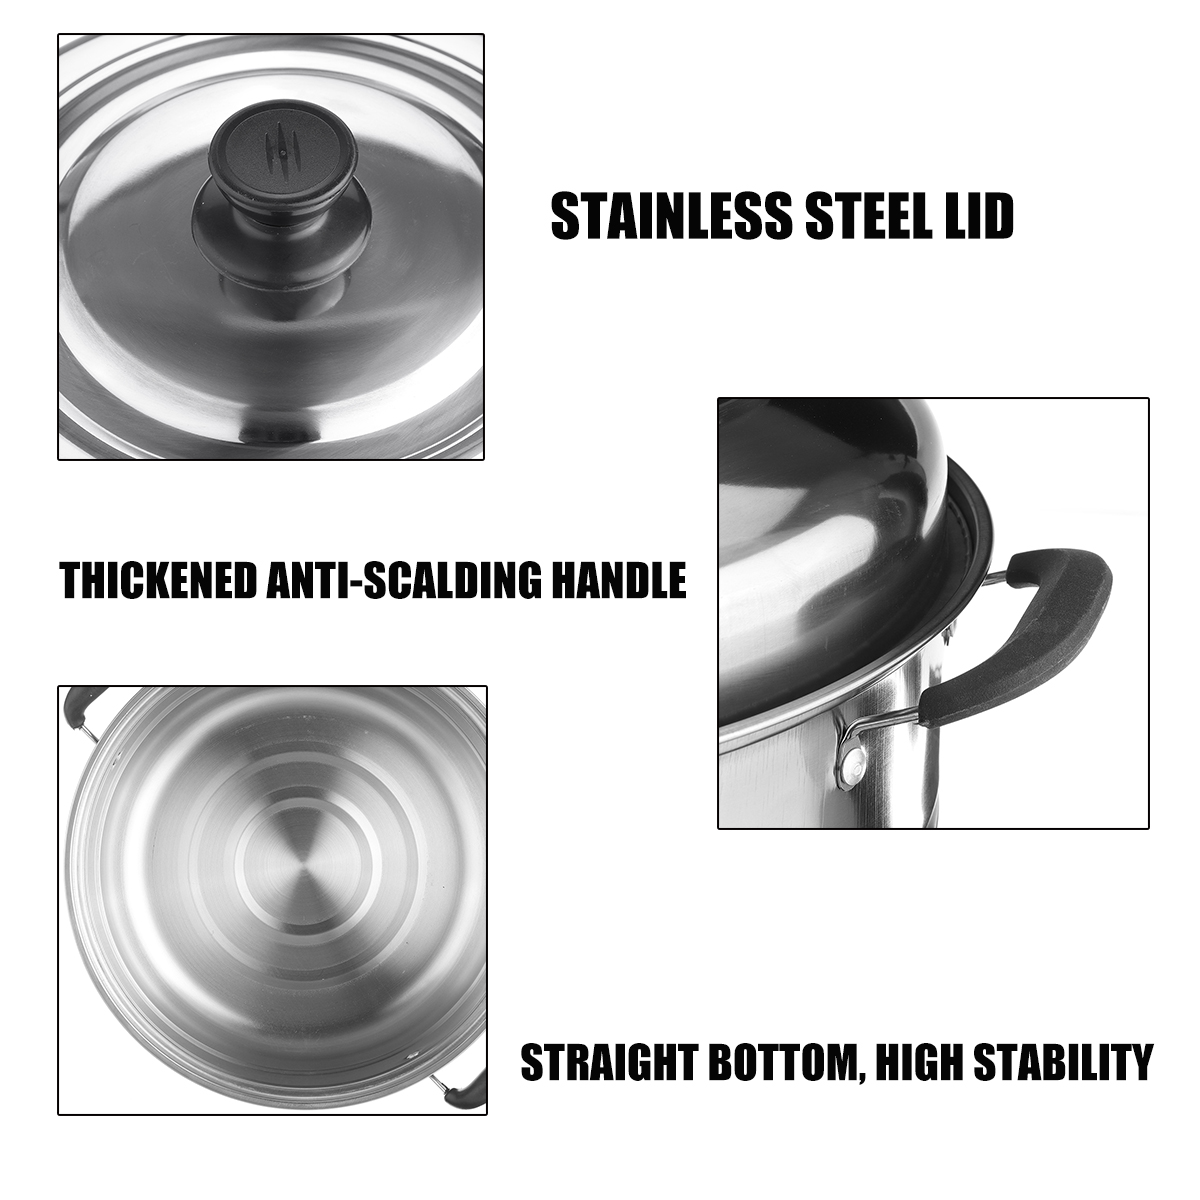 3-Tier-Stainless-Steel-Pot-Steamer-Steam-Cooking-Cooker-Cookware-Hot-Pot-Kitchen-Cooking-Tools-1672892-6